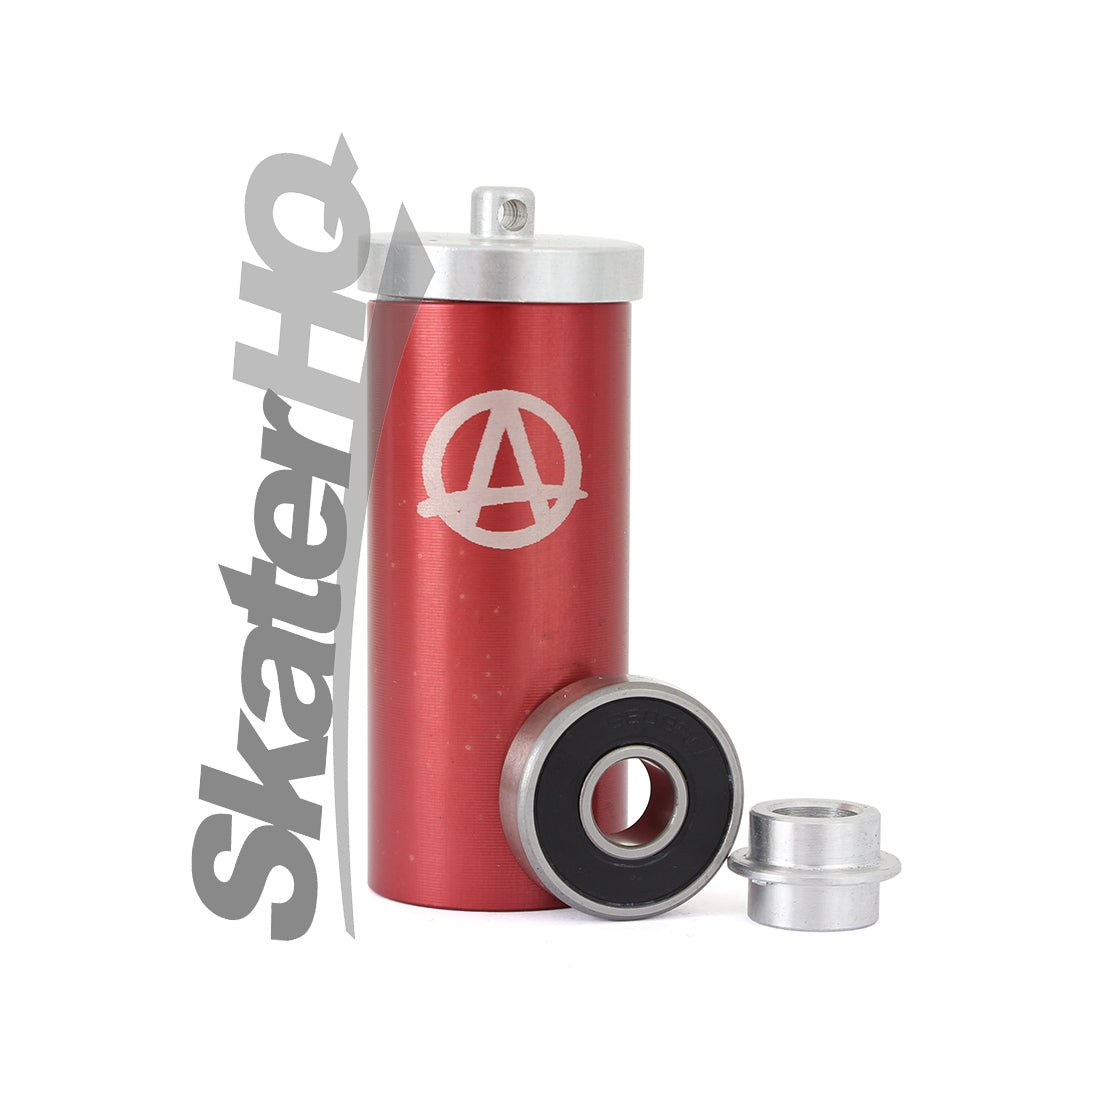 Apex Steel/Ceramic Bearing Kit - 4pk- SALE Scooter Hardware and Parts